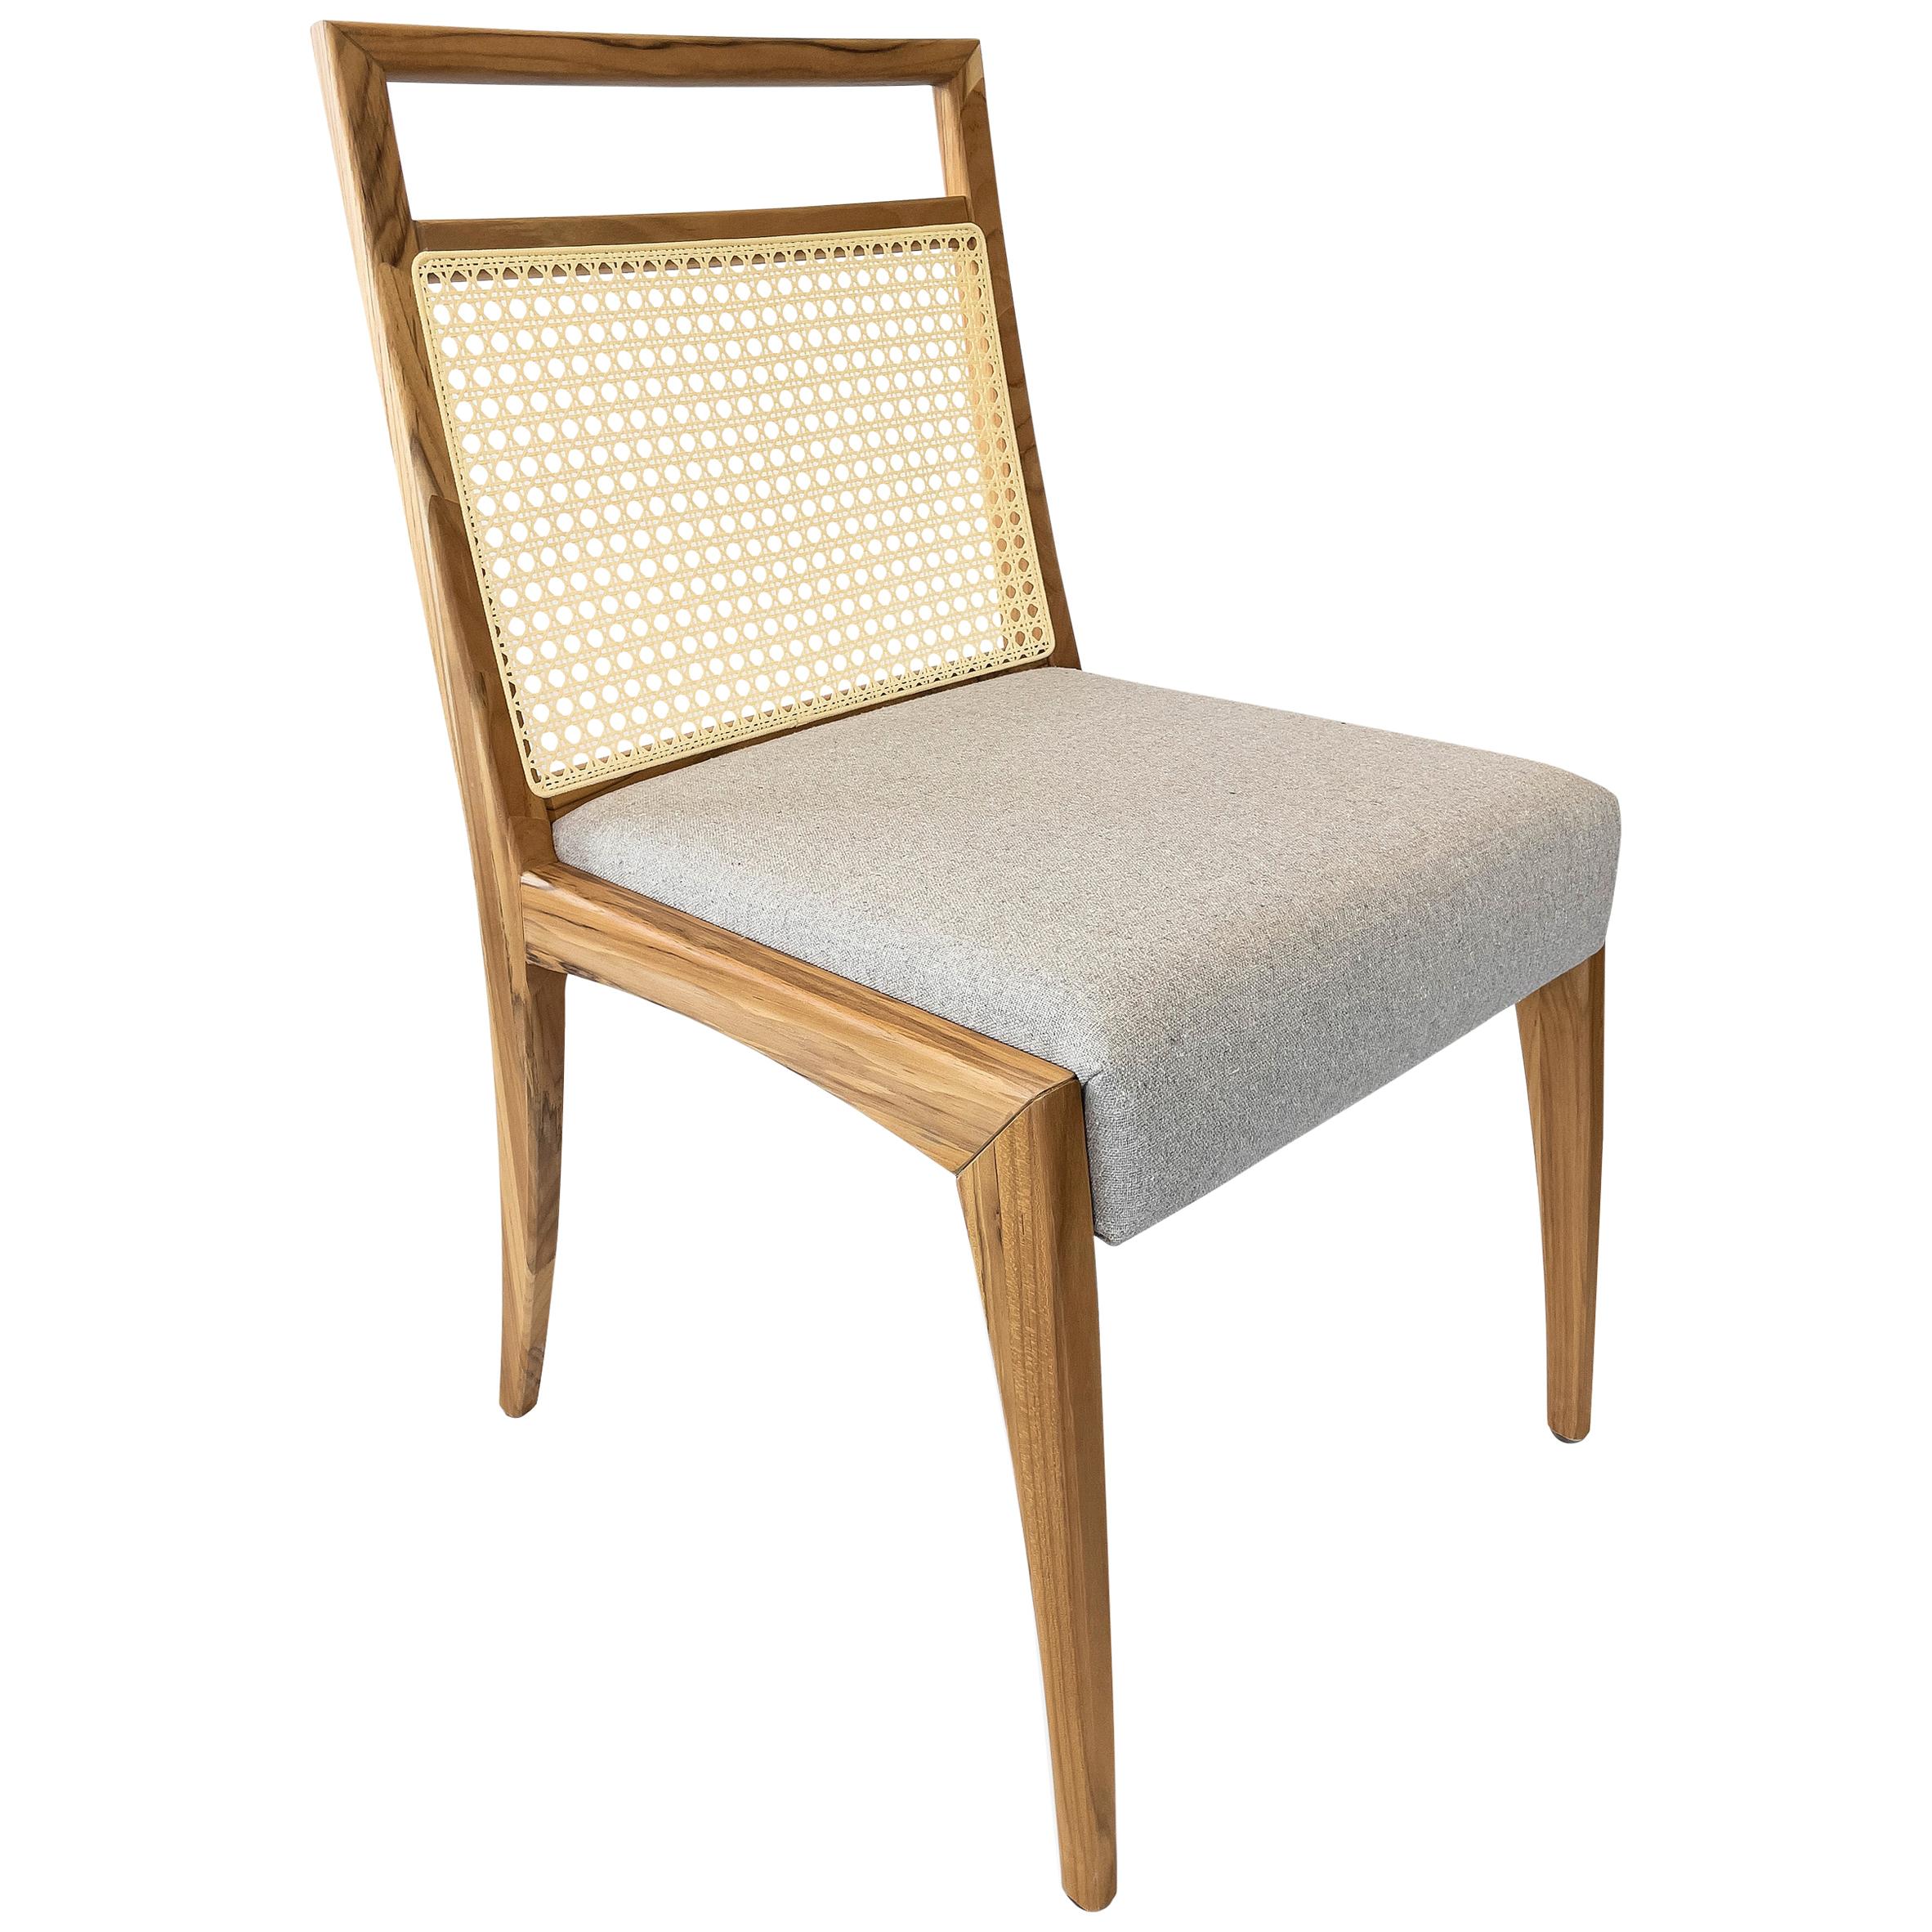 Putting a lot of effort our amazing Uultis team has created the Sotto dining chair, thinking of every possible detail like the cane back that just blends perfectly with the teak wood finish and the light gray fabric. This pair of chairs are